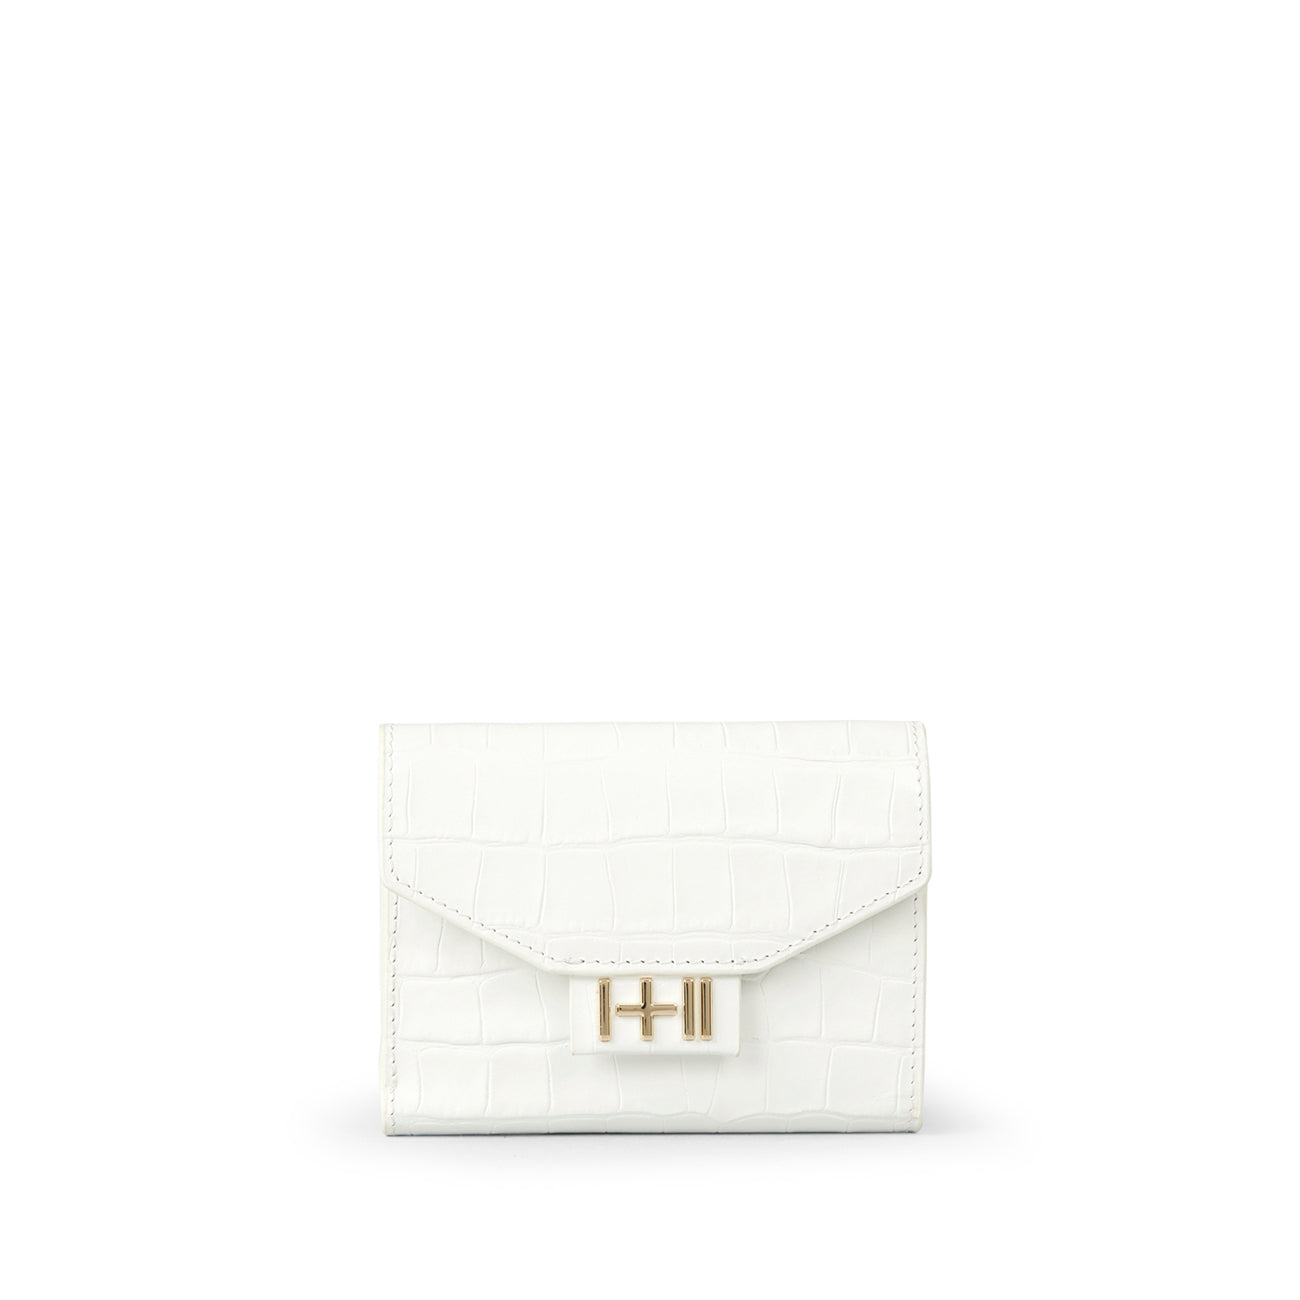 SAMPLE - The Helena Wallet White